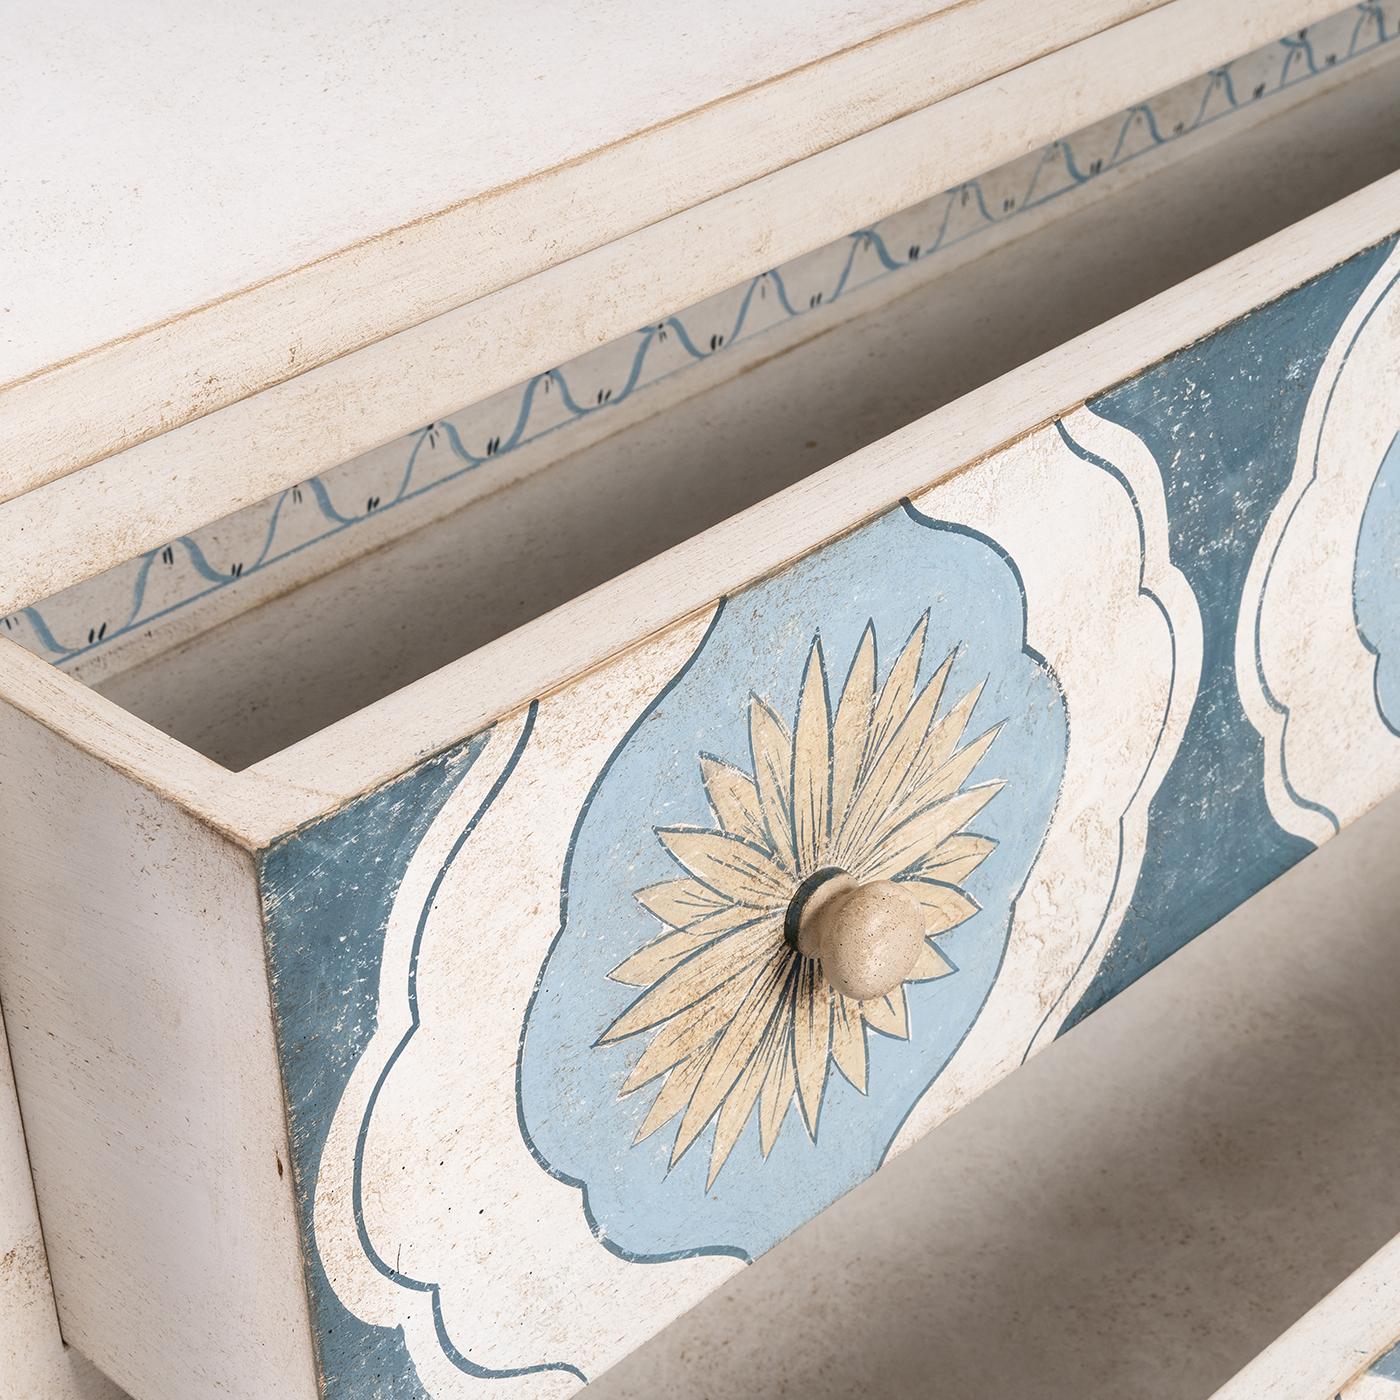 Introducing Barberini Chest with sunflower decor in deep sea blue and parma blue tones. The ribbon decoration inside the drawers adds a delightful touch. Customizable in size and design. Please, ask the Concierge service for further information.